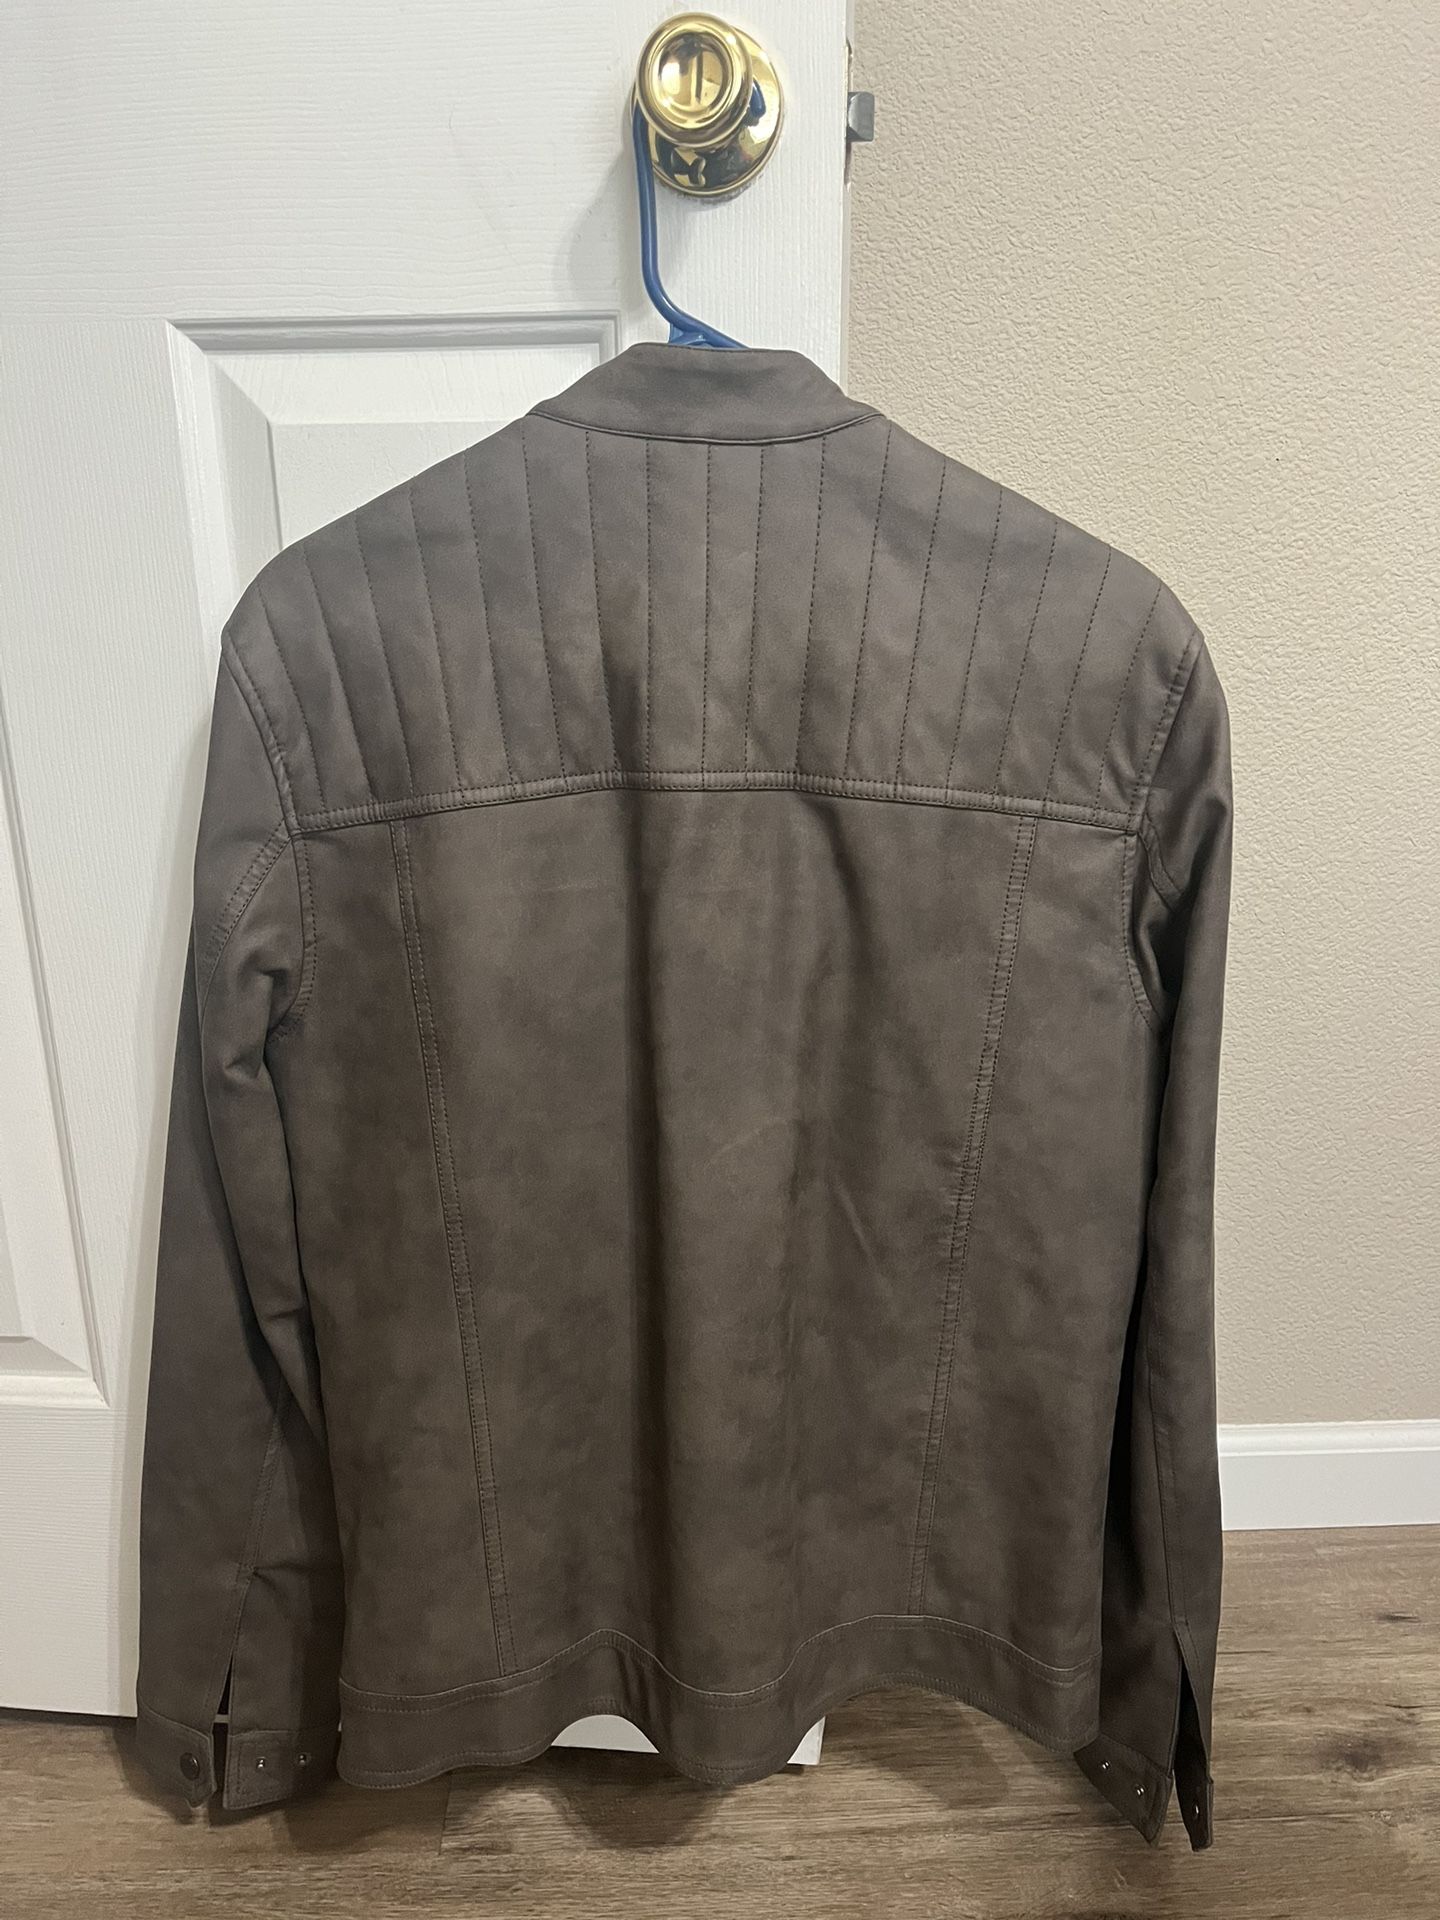 Guess Men’s Karson Suede Jacket- Brand New